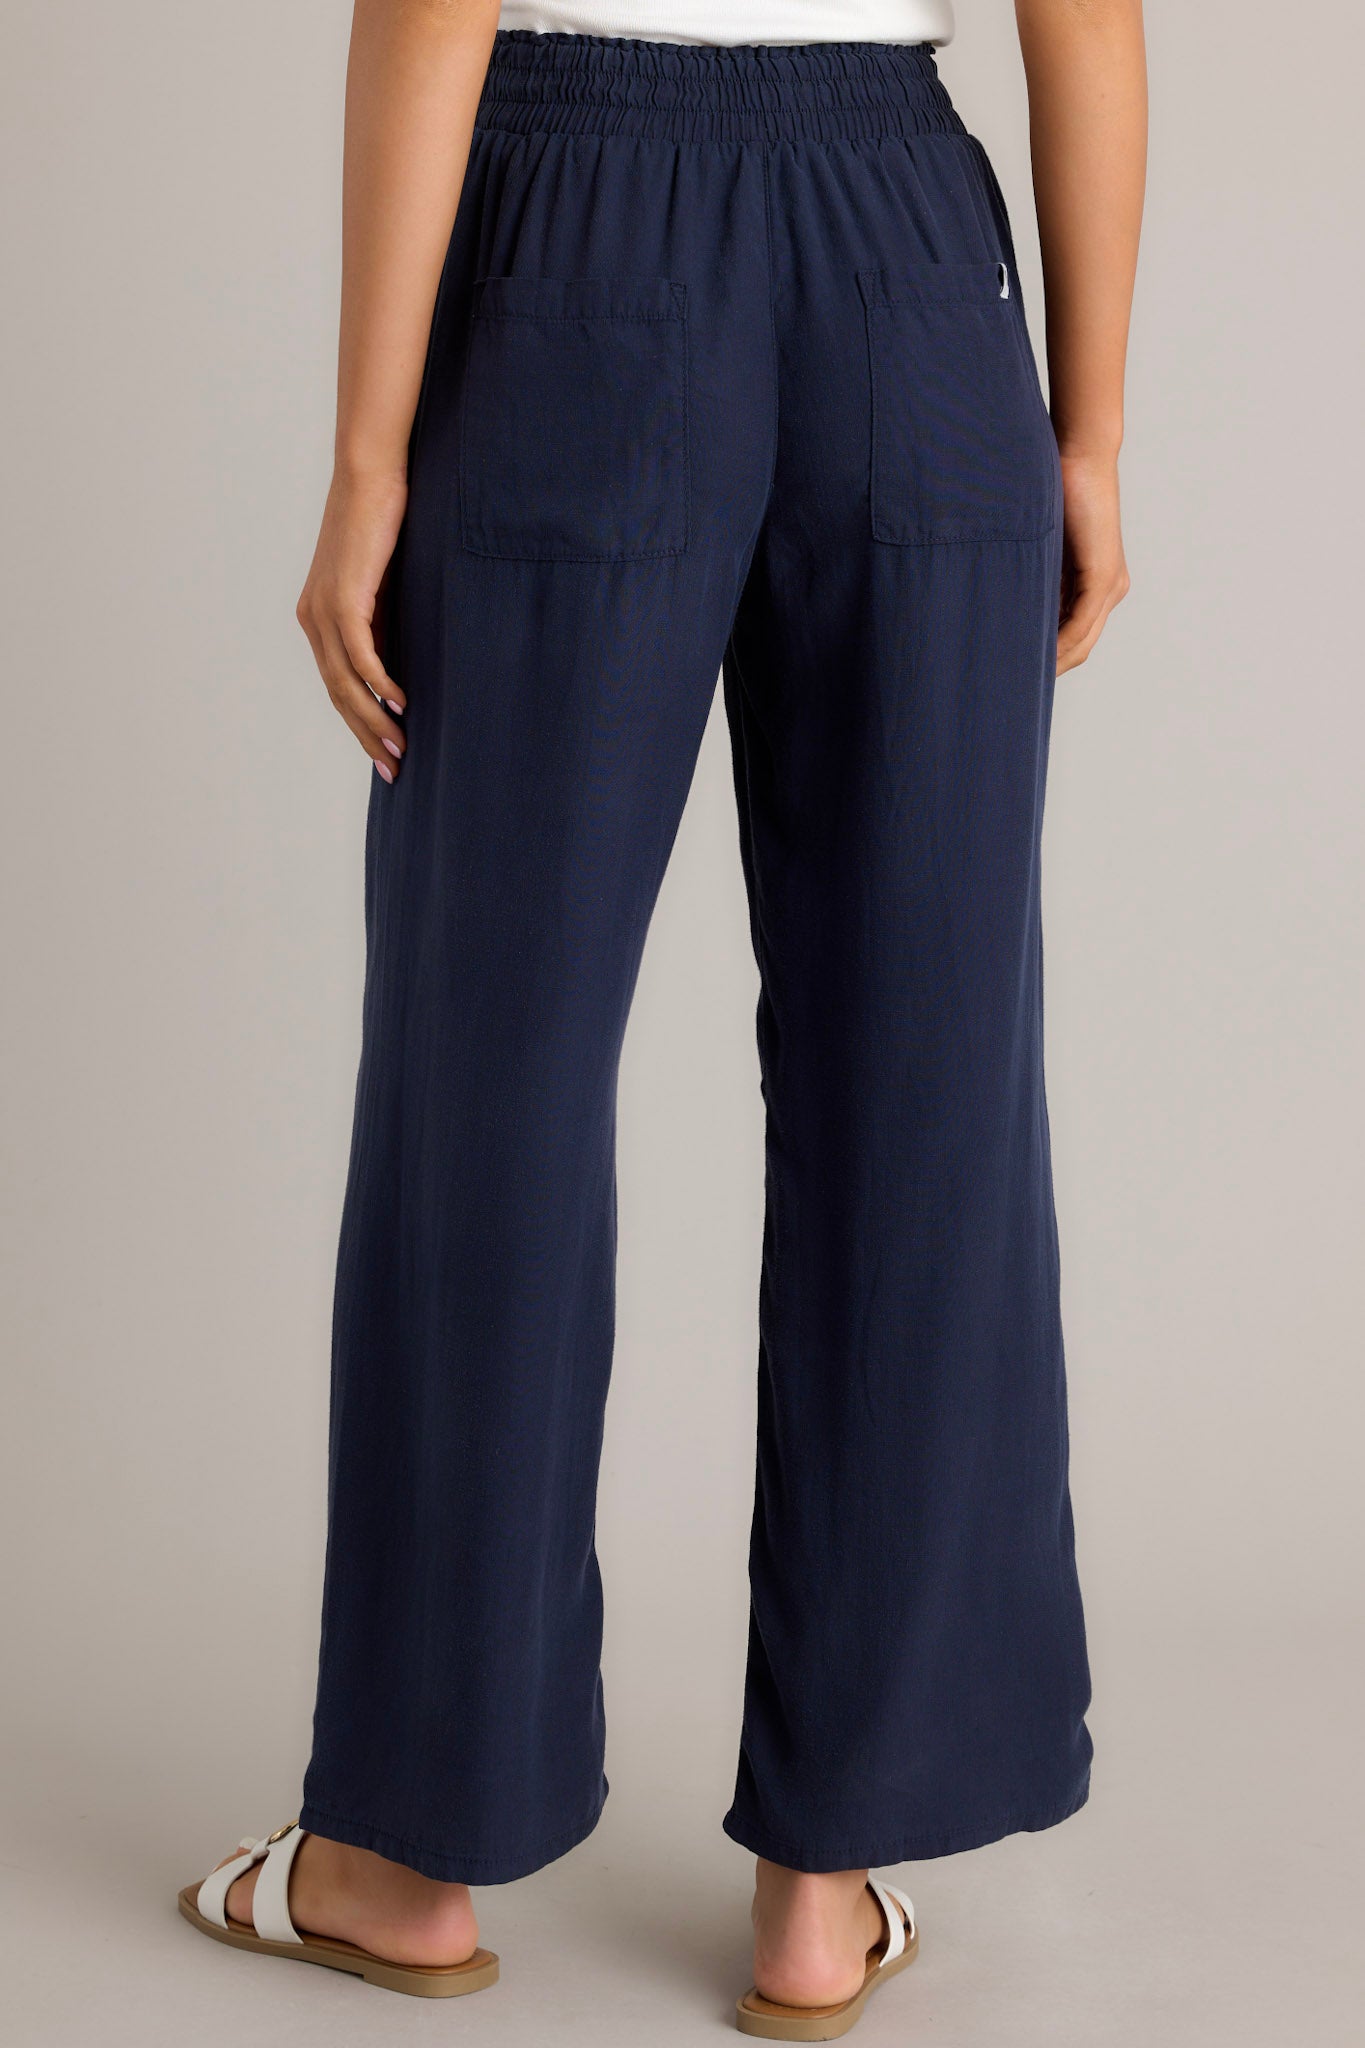 Back view of these Navy wide-leg pants with an elastic waistband and drawstring, paired with white sandals.